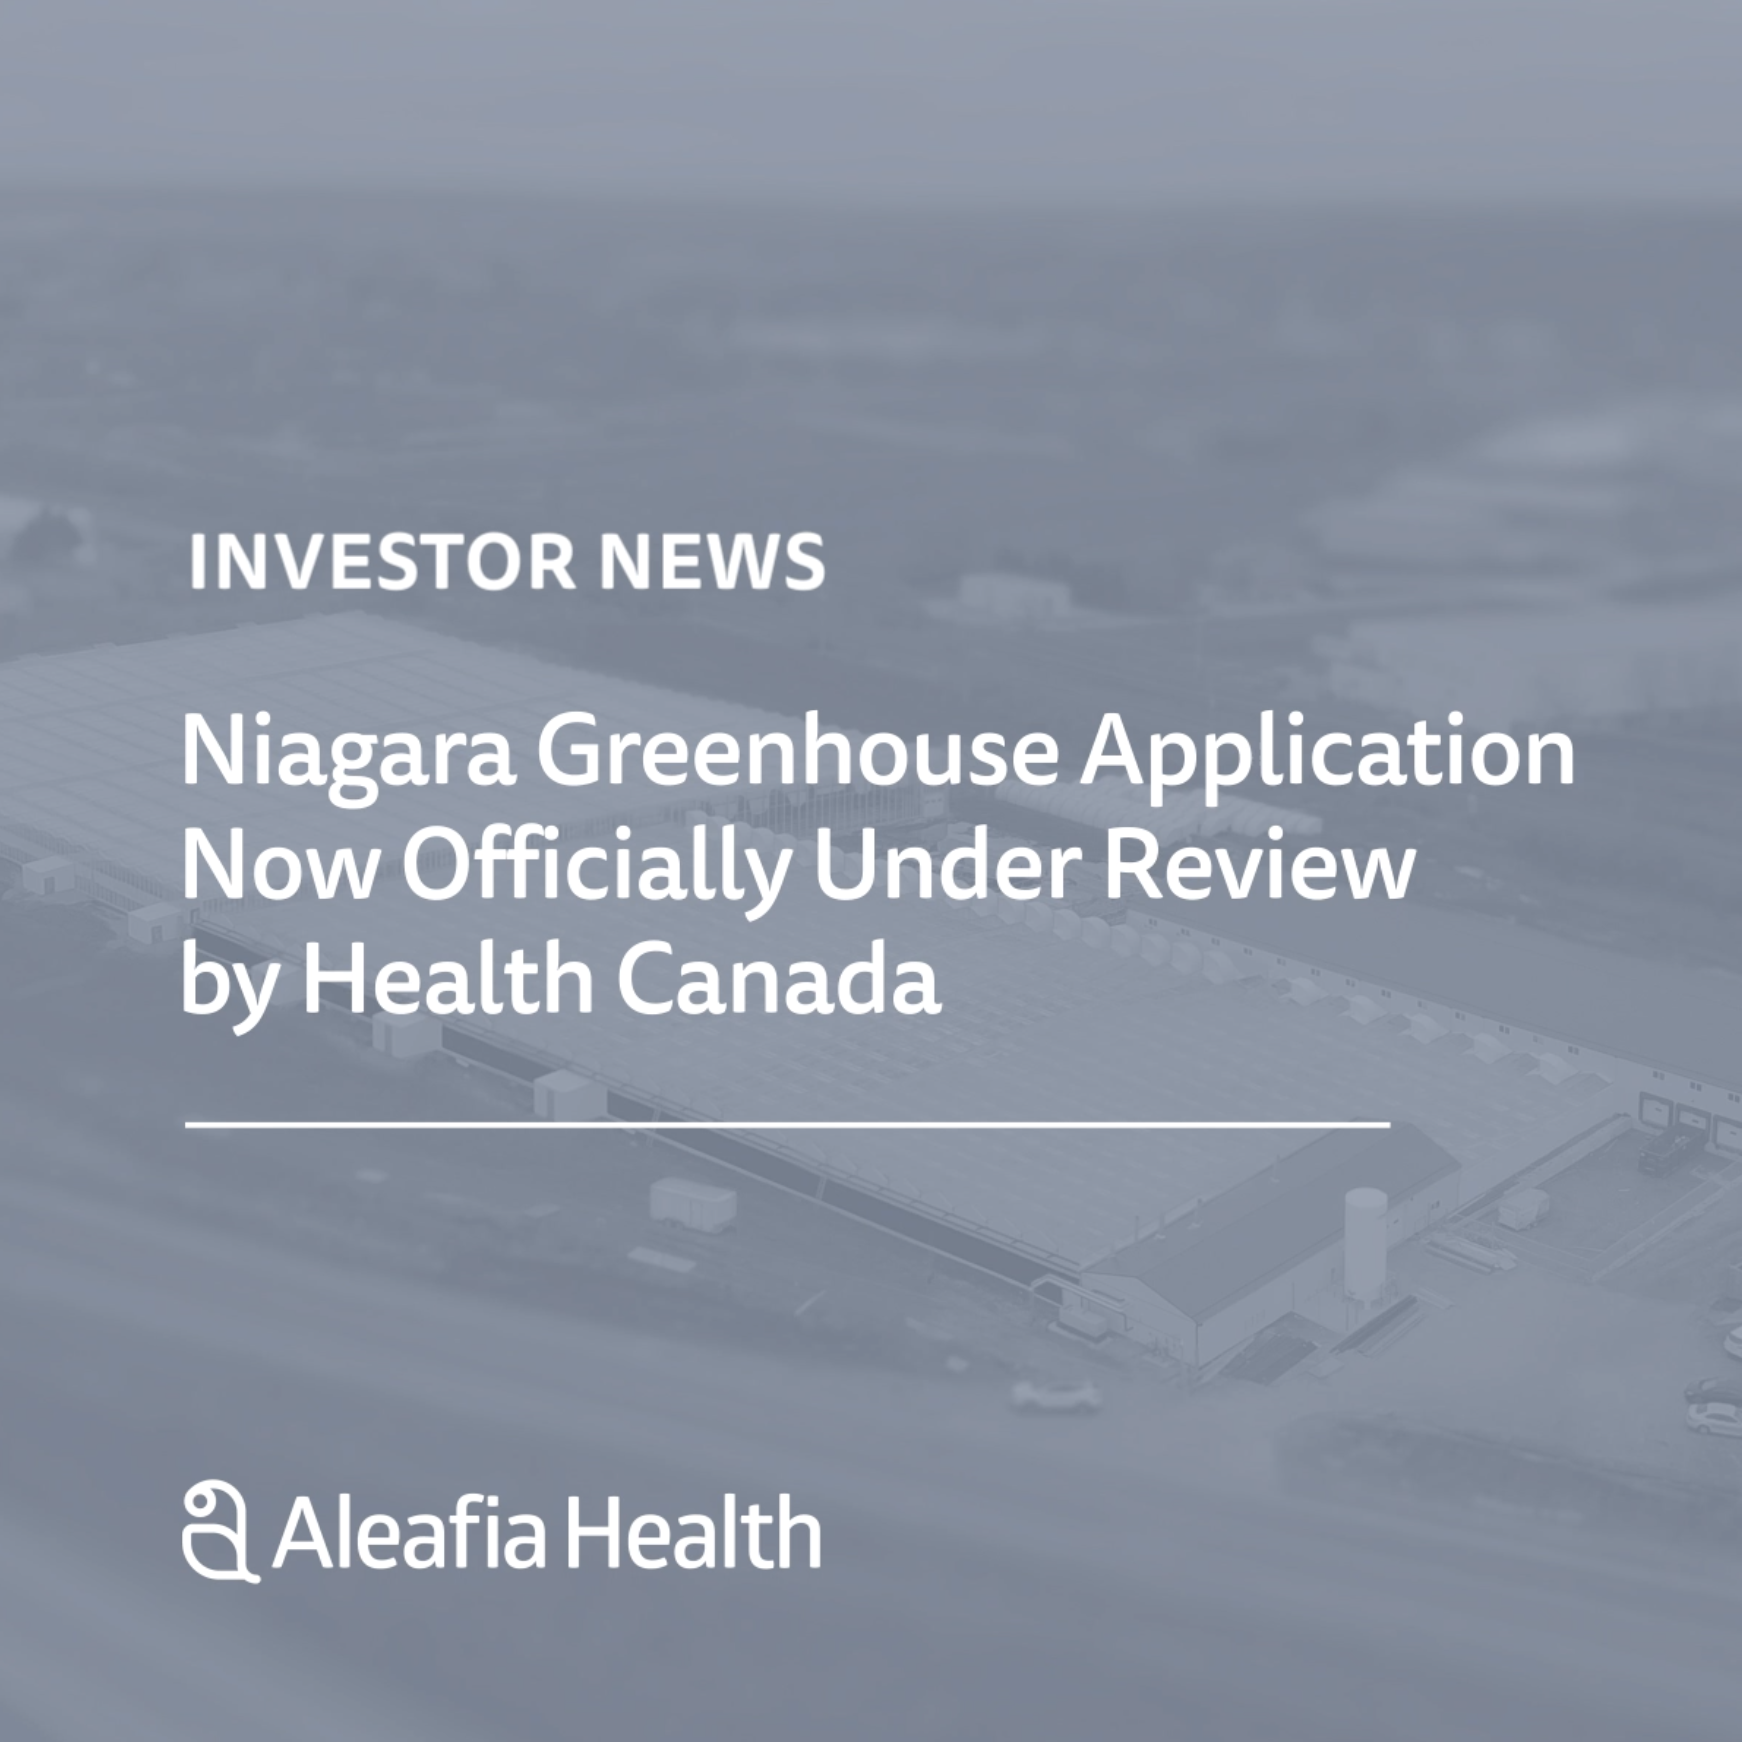 Aleafia Health Completes Largest Cannabis Order to Date, Provides Facility Update